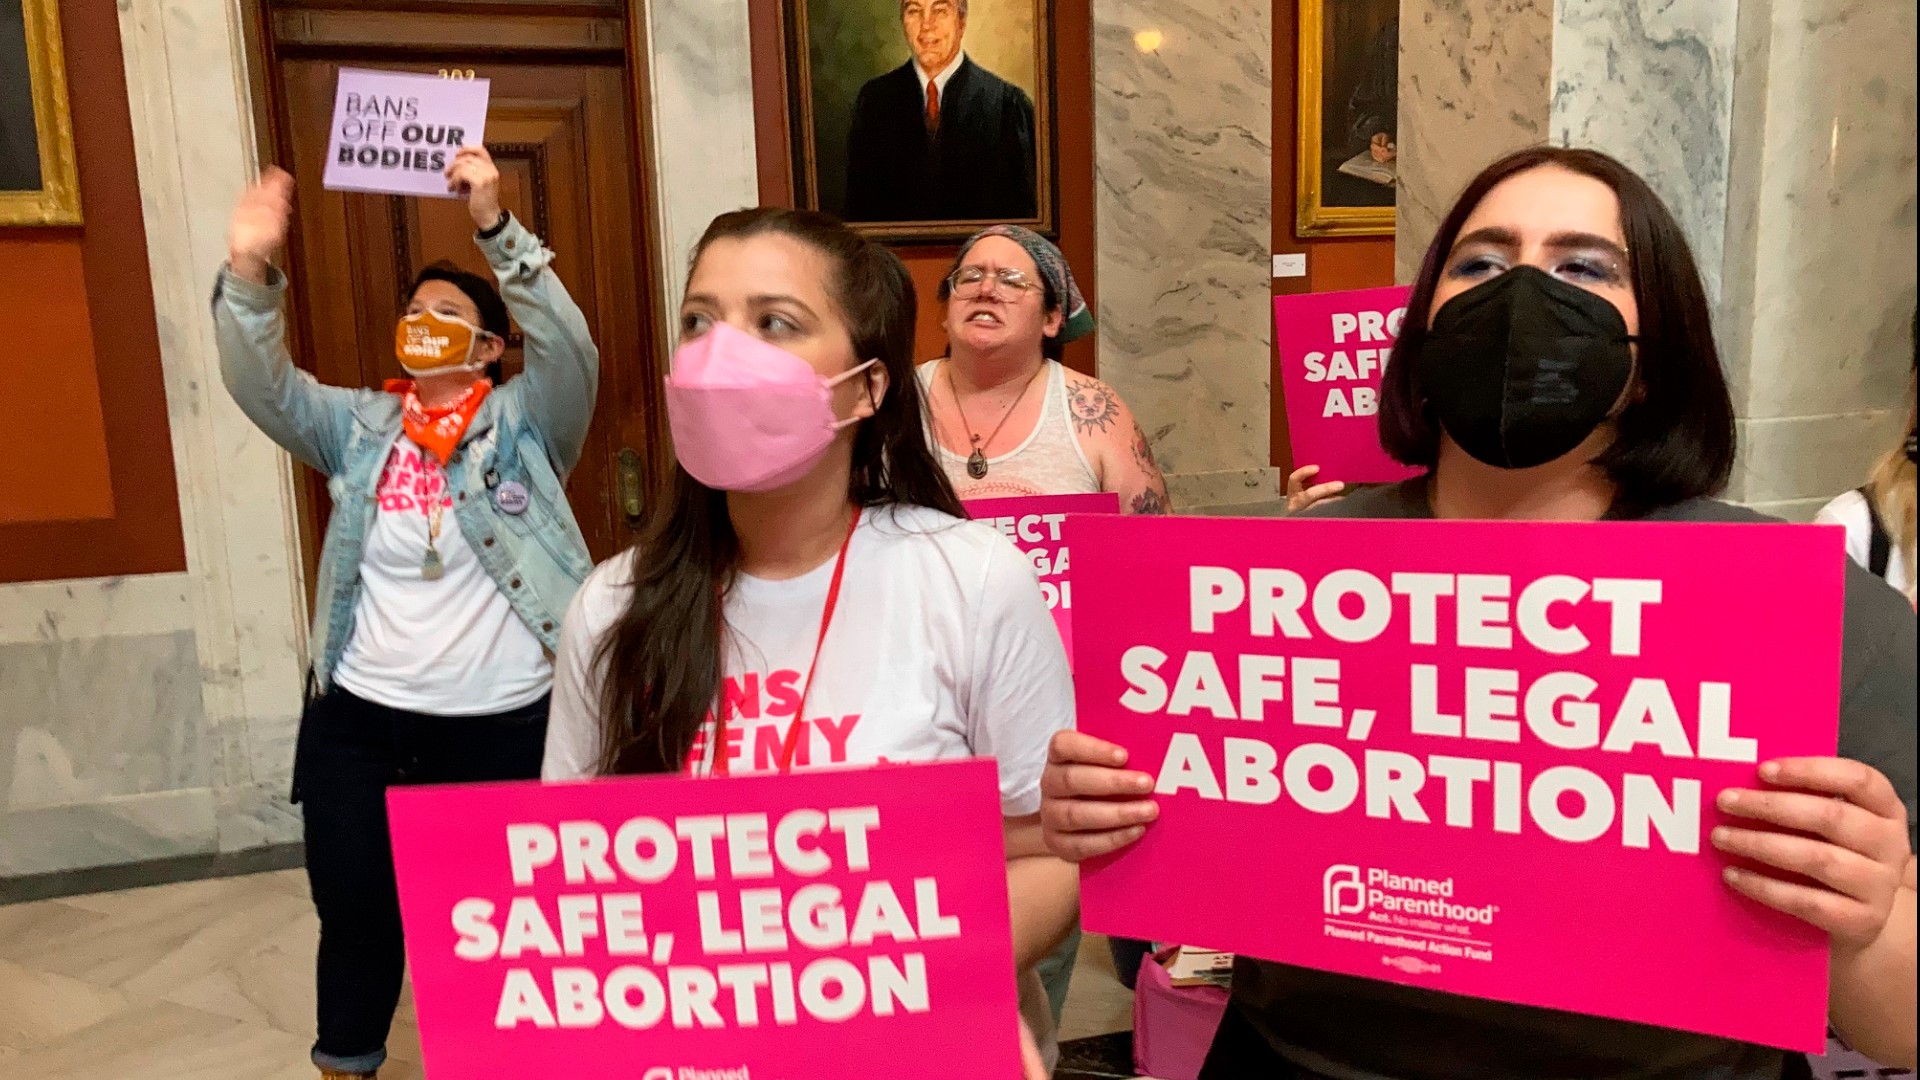 The latest state is Florida, where the governor signed a bill banning abortion after 15 weeks of pregnancy.